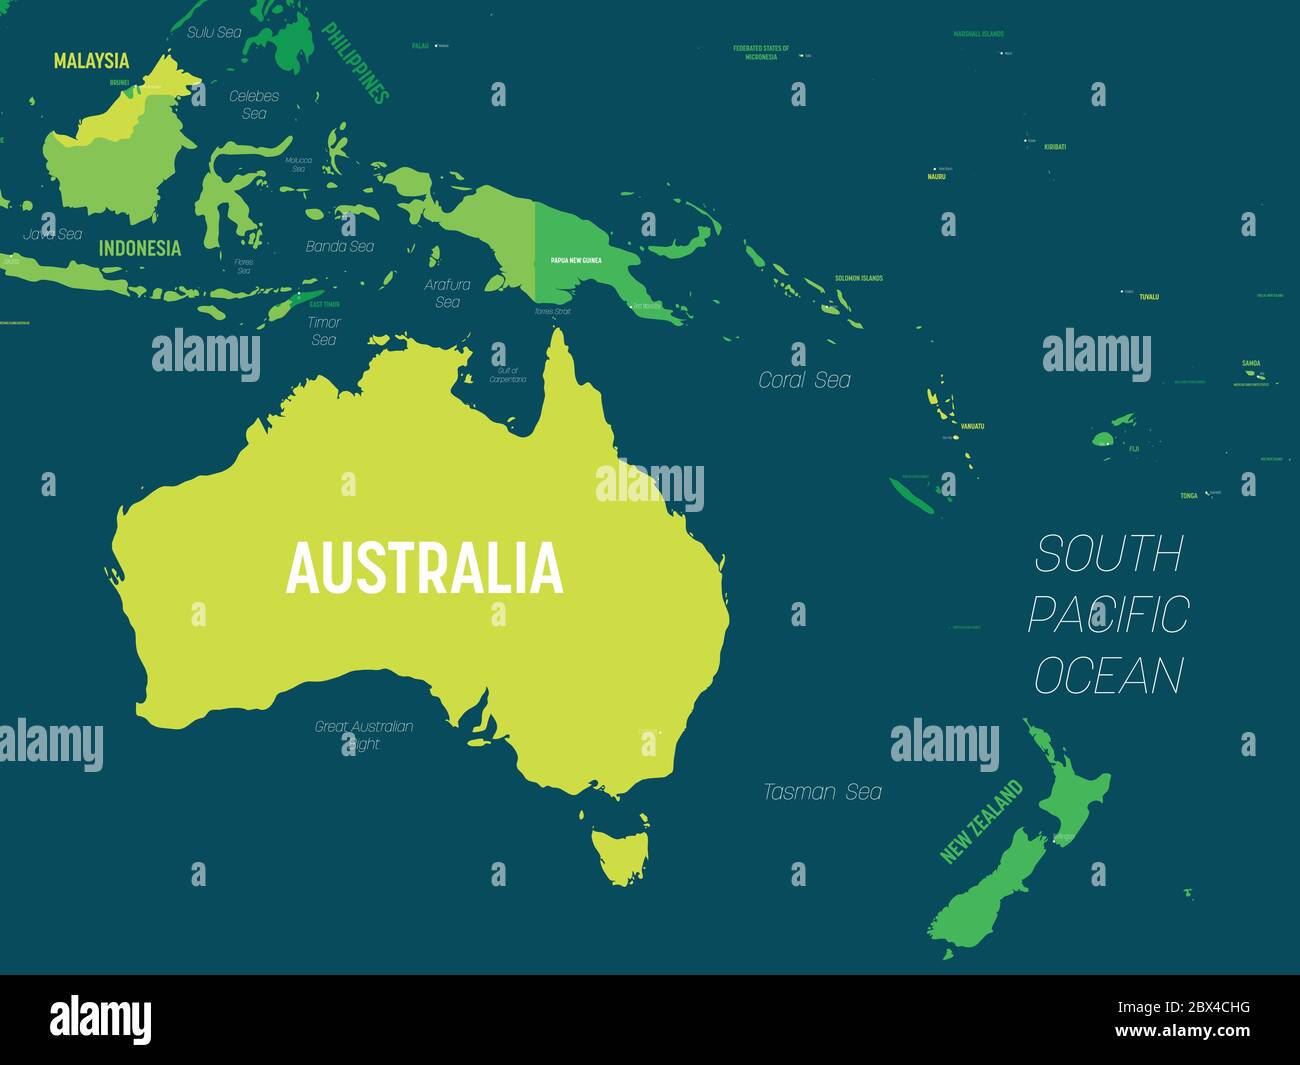 Australia and Oceania map green hue colored on dark